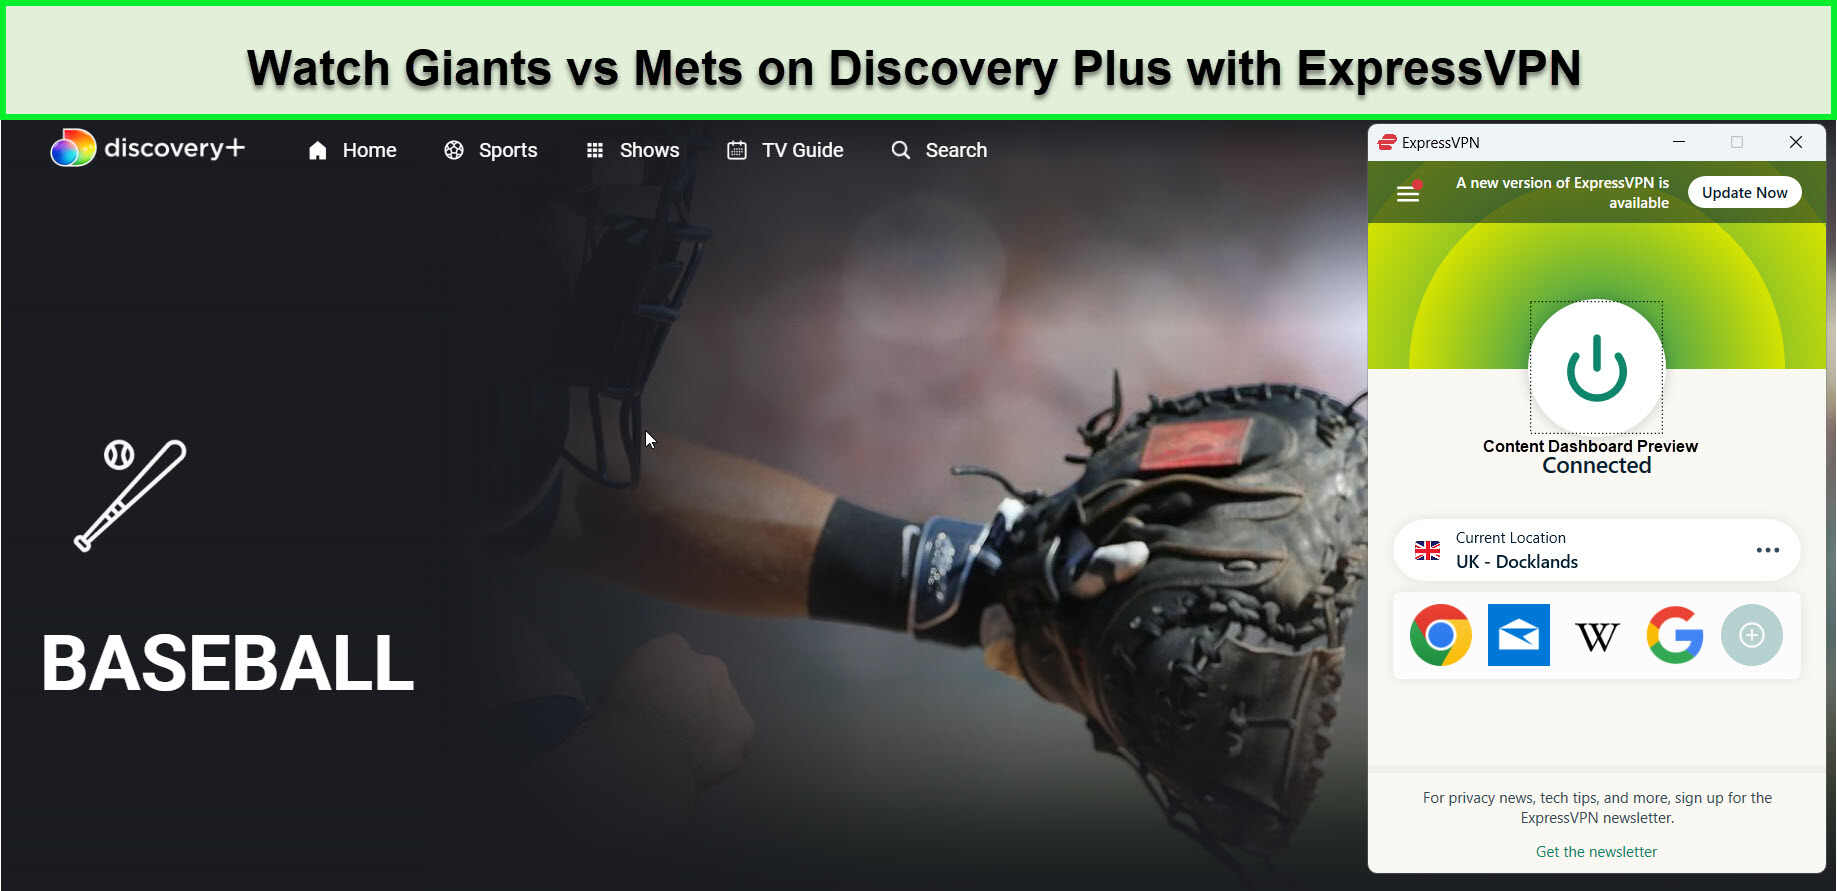 Watch-Giants-vs-Mets-in-South Korea-on-Discovery-Plus-with-ExpressVPN